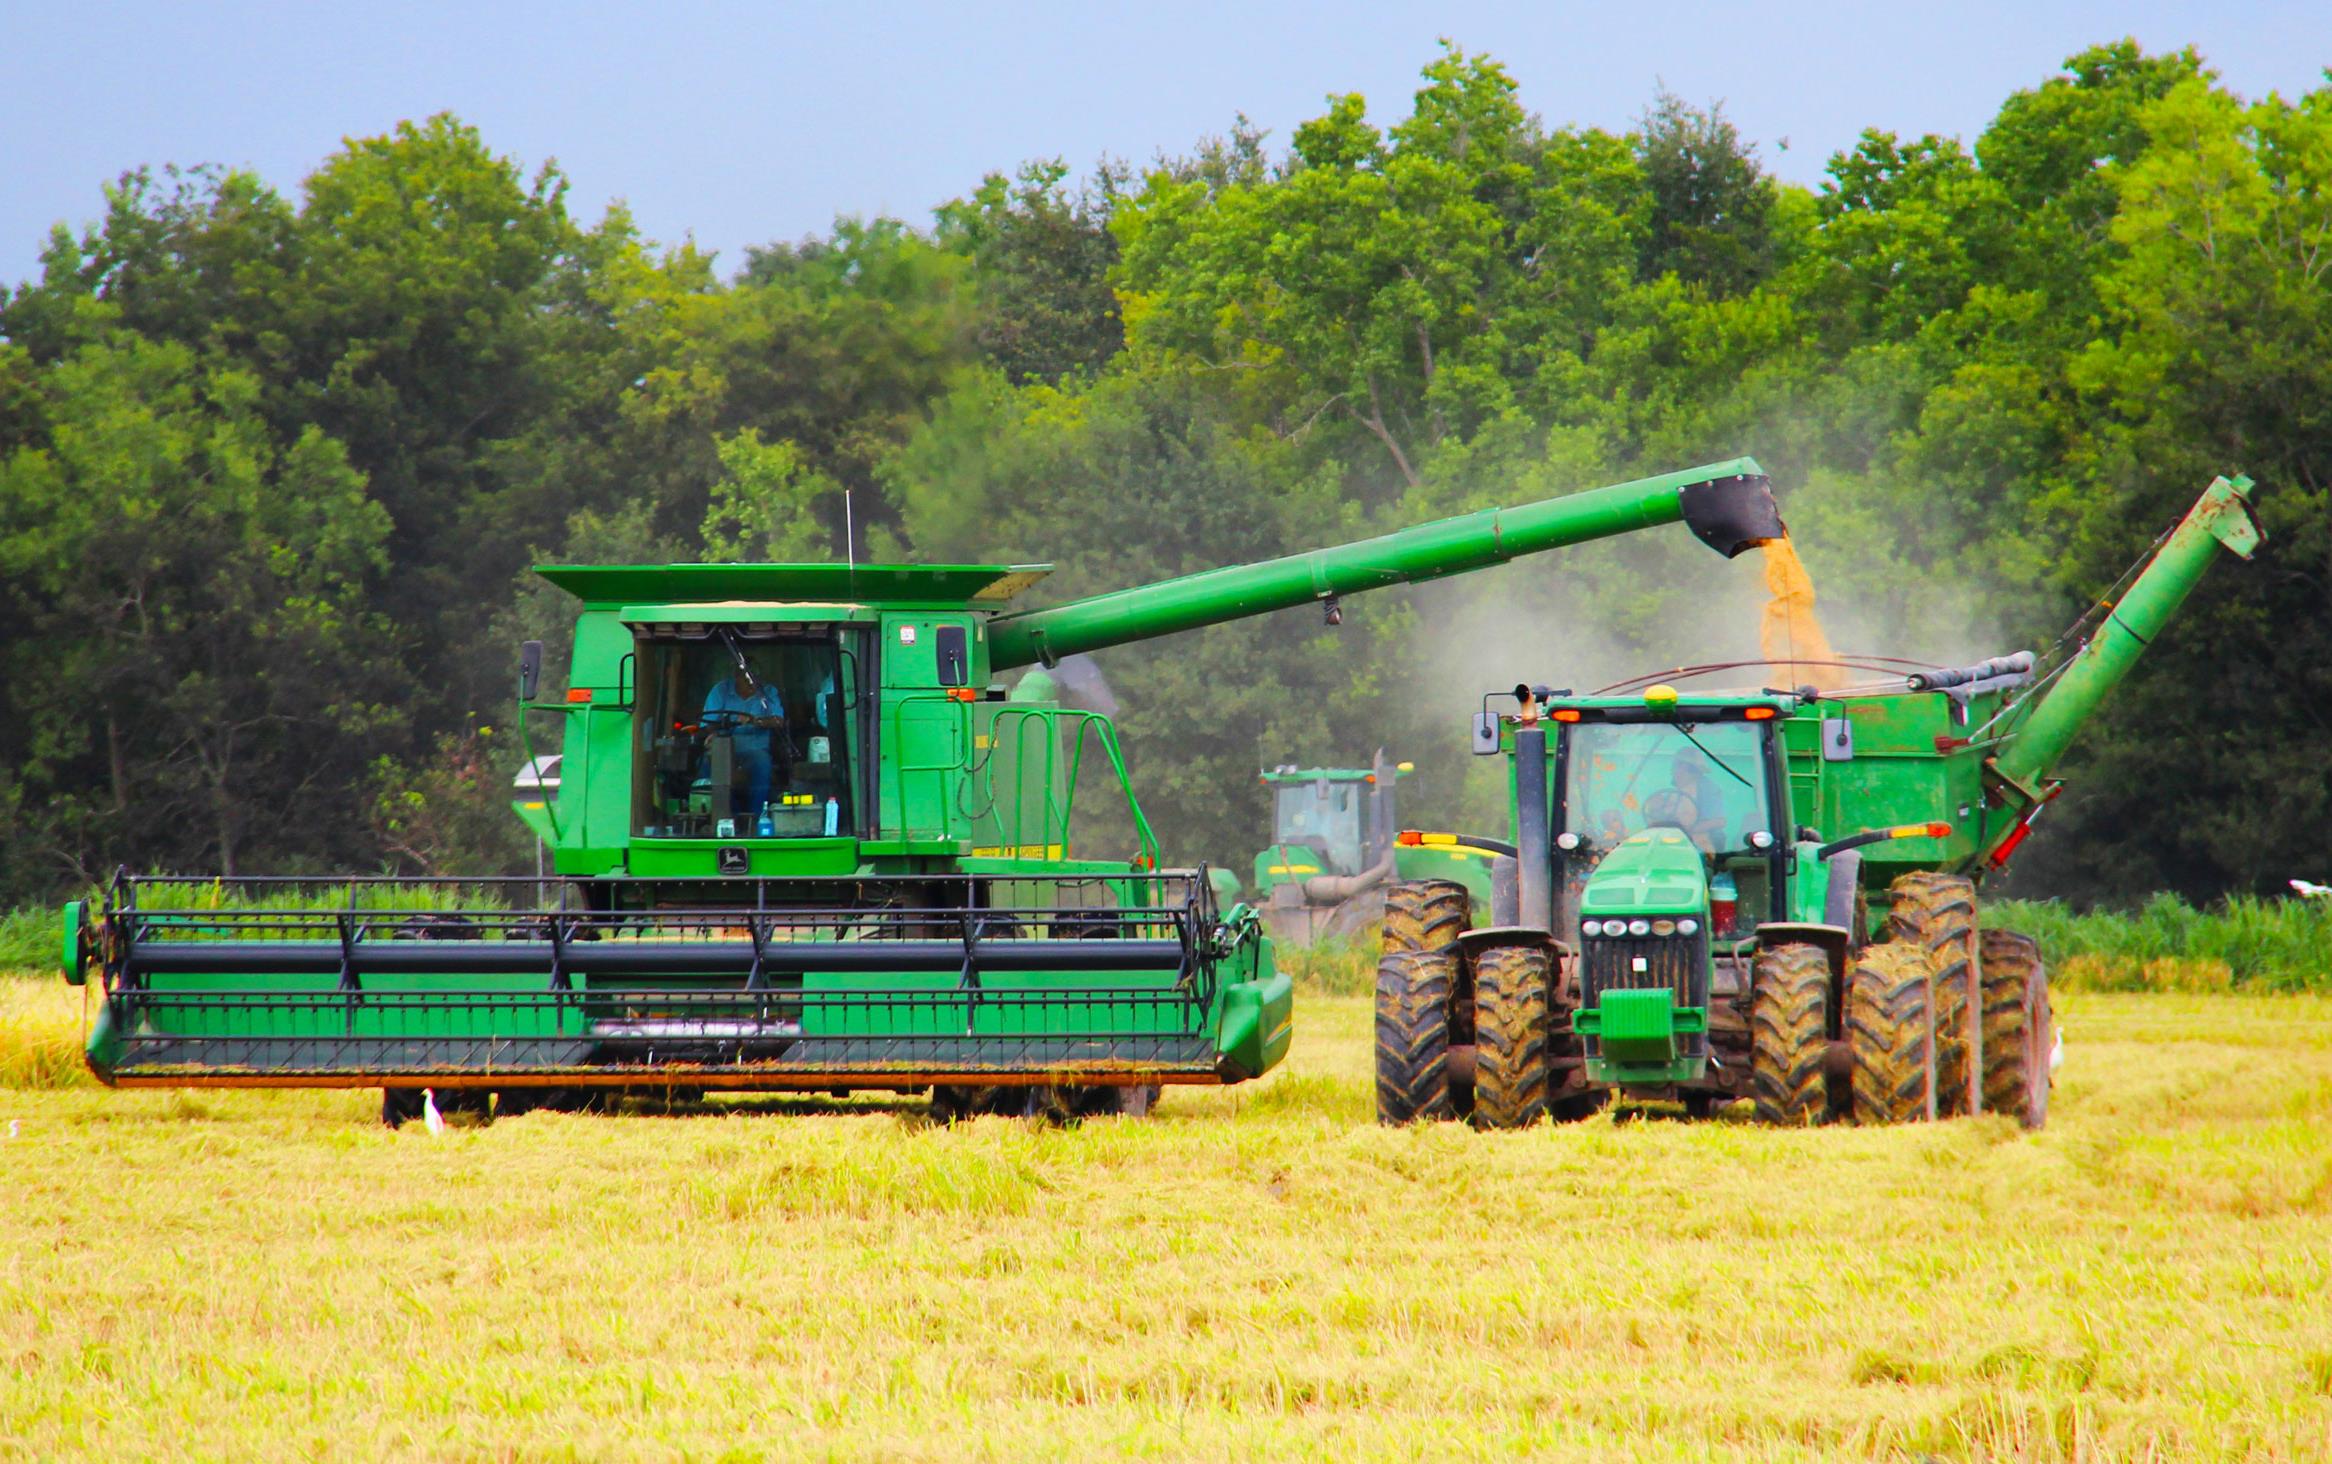 Green combine and grain truck loading harvested rice in yellow field